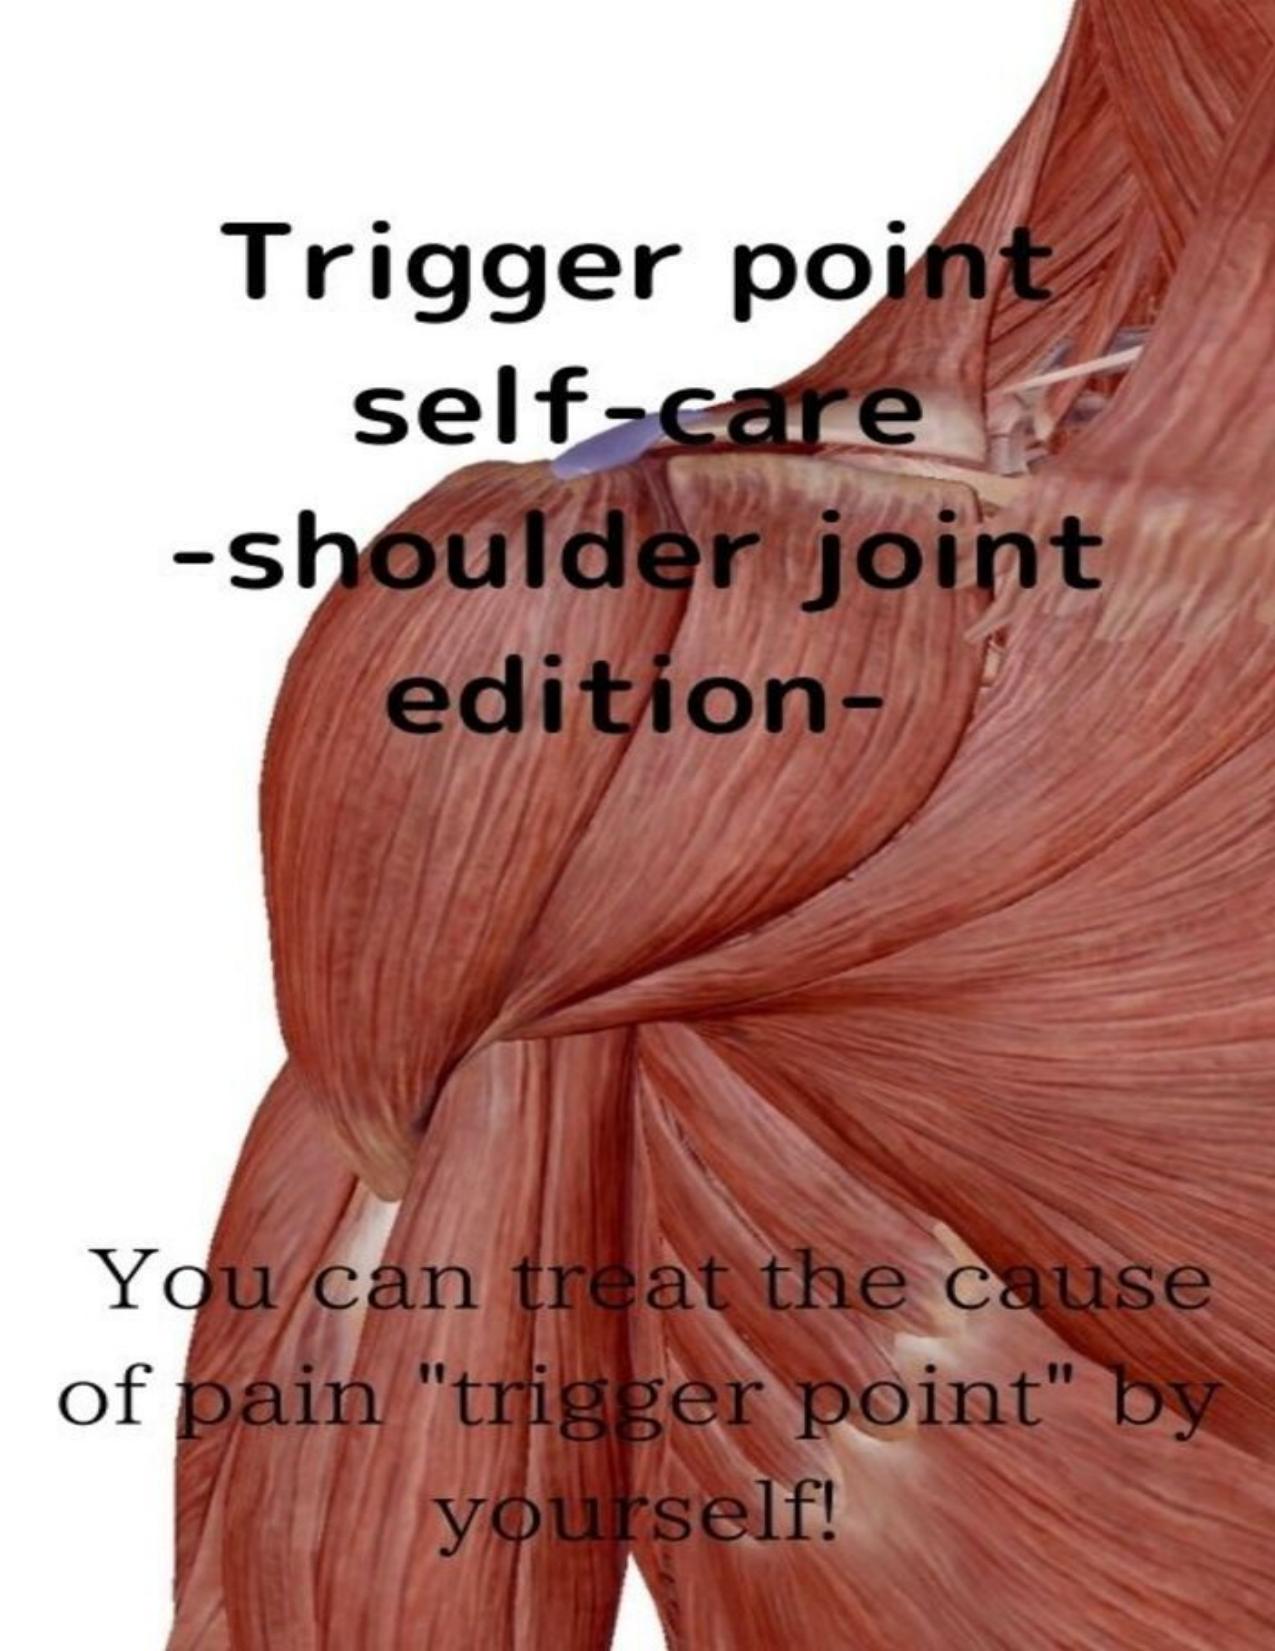 Trigger point self-care-shoulder joint edition-: You can treat the cause of pain "trigger point" by yourself! by HERO PUNCH